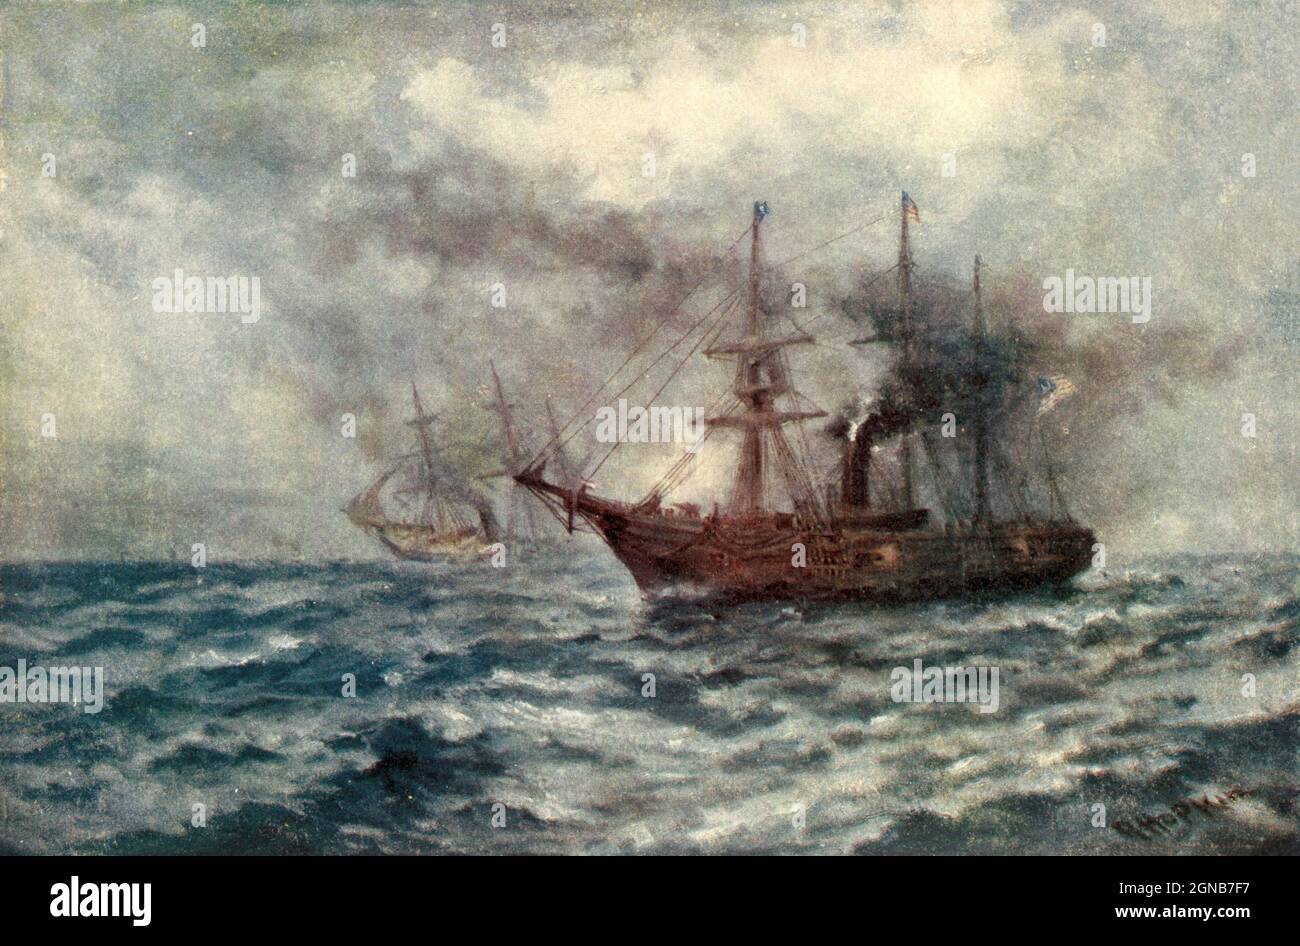 USS Kearsarge (1861) was a sloop of war launched 11 September 1861, fought in the American Civil War, defeated the Confederate commerce raider CSS Alabama, and was wrecked off Central America 2 February 1894. Color artwork painting from the book ' The Civil war through the camera ' hundreds of vivid photographs actually taken in Civil war times, sixteen reproductions in color of famous war paintings. The new text history by Henry W. Elson. A. complete illustrated history of the Civil war Stock Photo